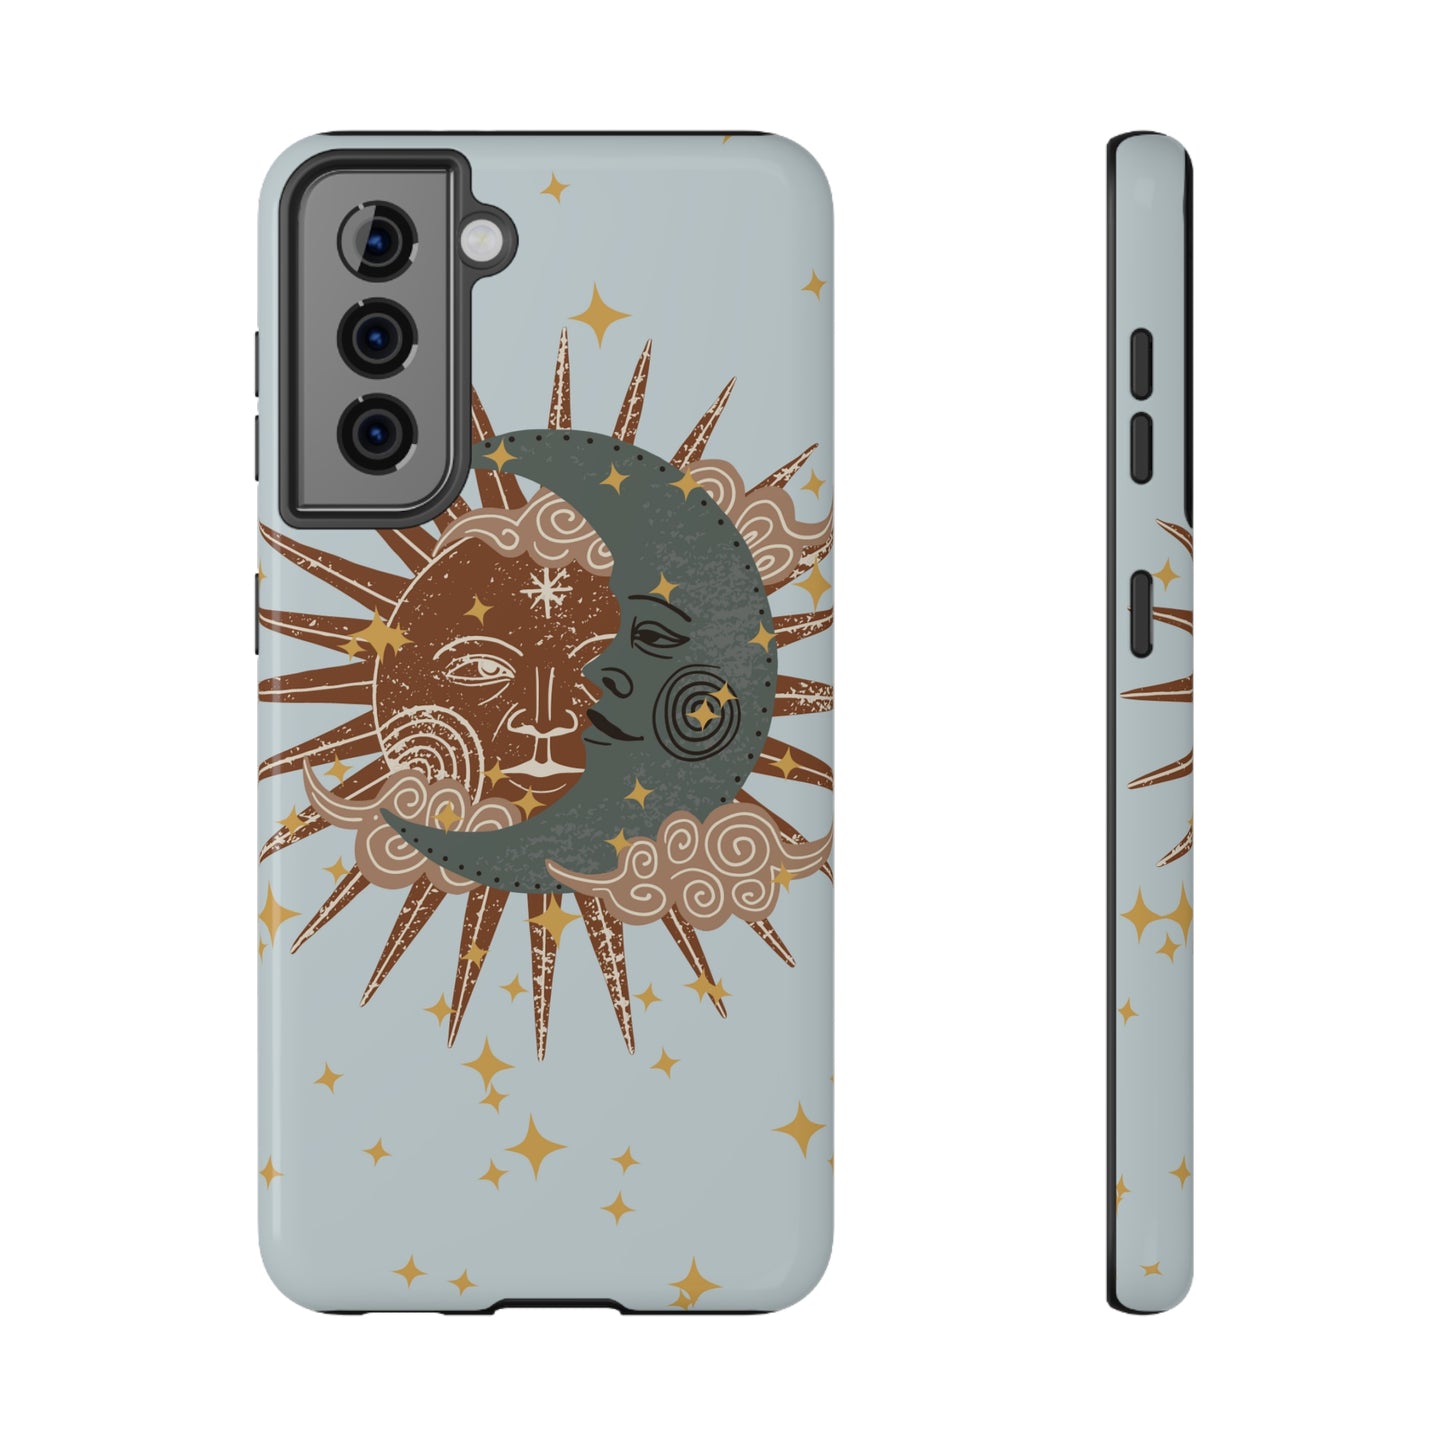 Solar Eclipse Galaxy Impact-Resistant Cases